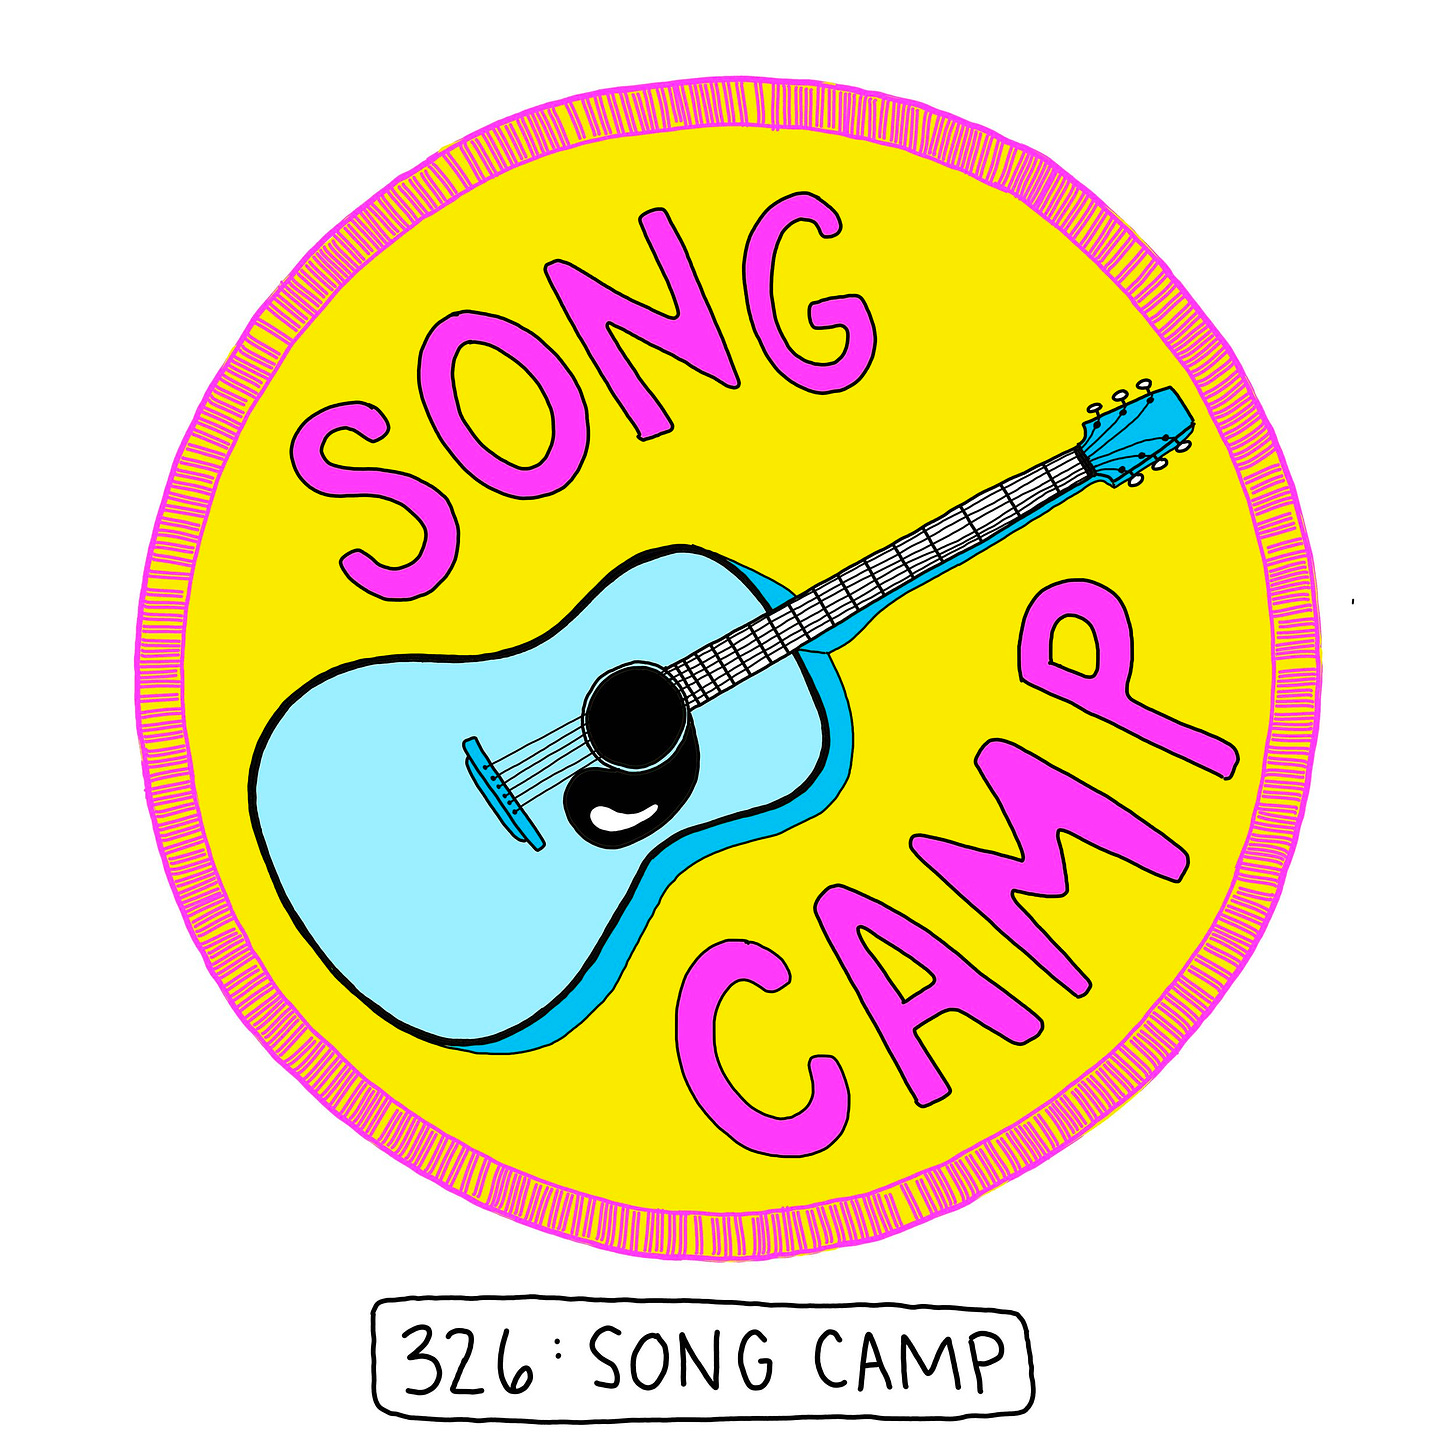 Song camp badge